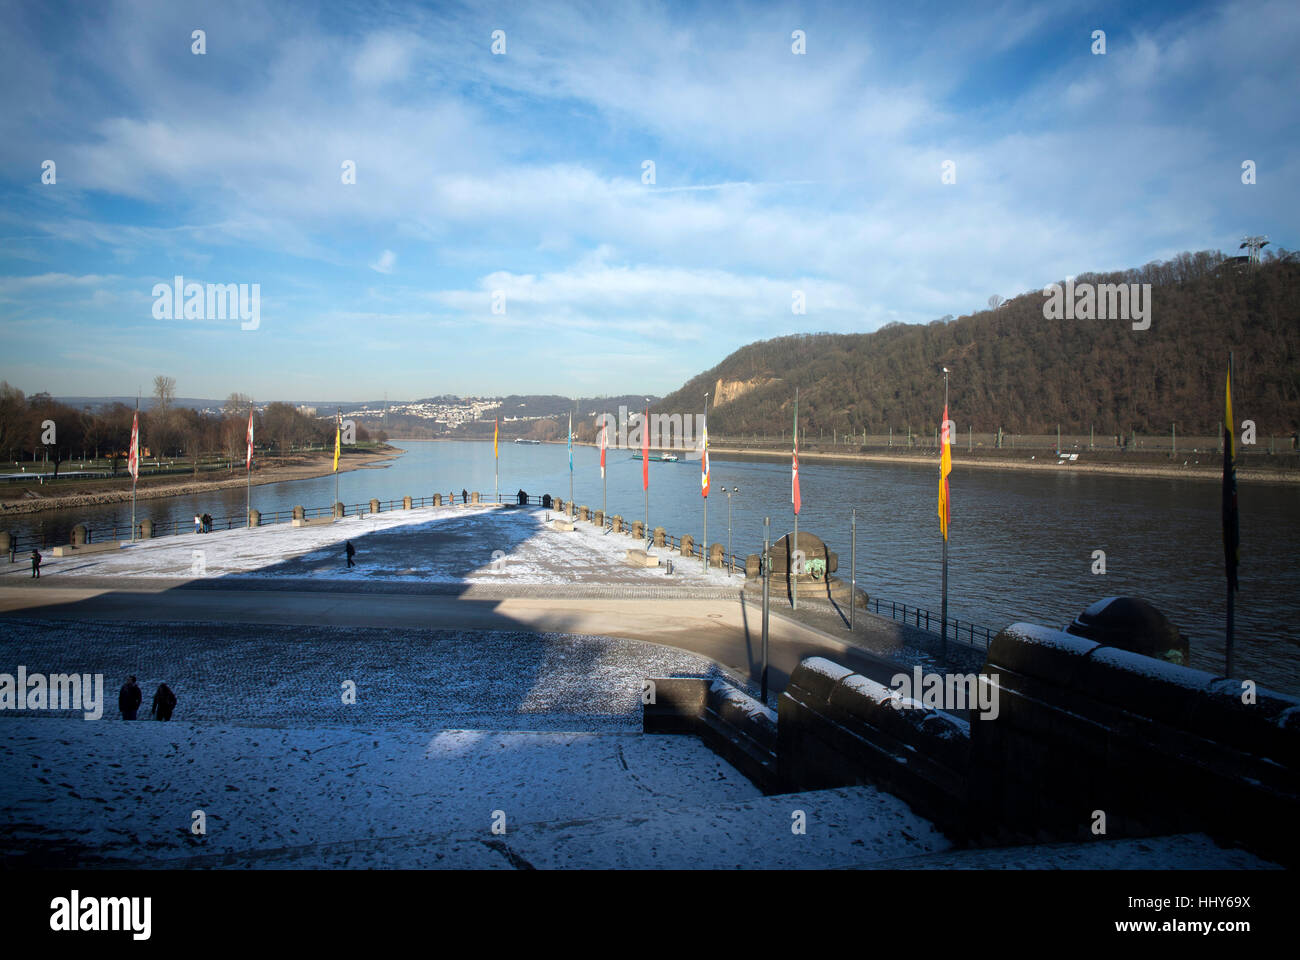 The Deutsches Eck (German Corner) where the rivers Rhein and Mosel meet in Koblenz, Germany. Stock Photo